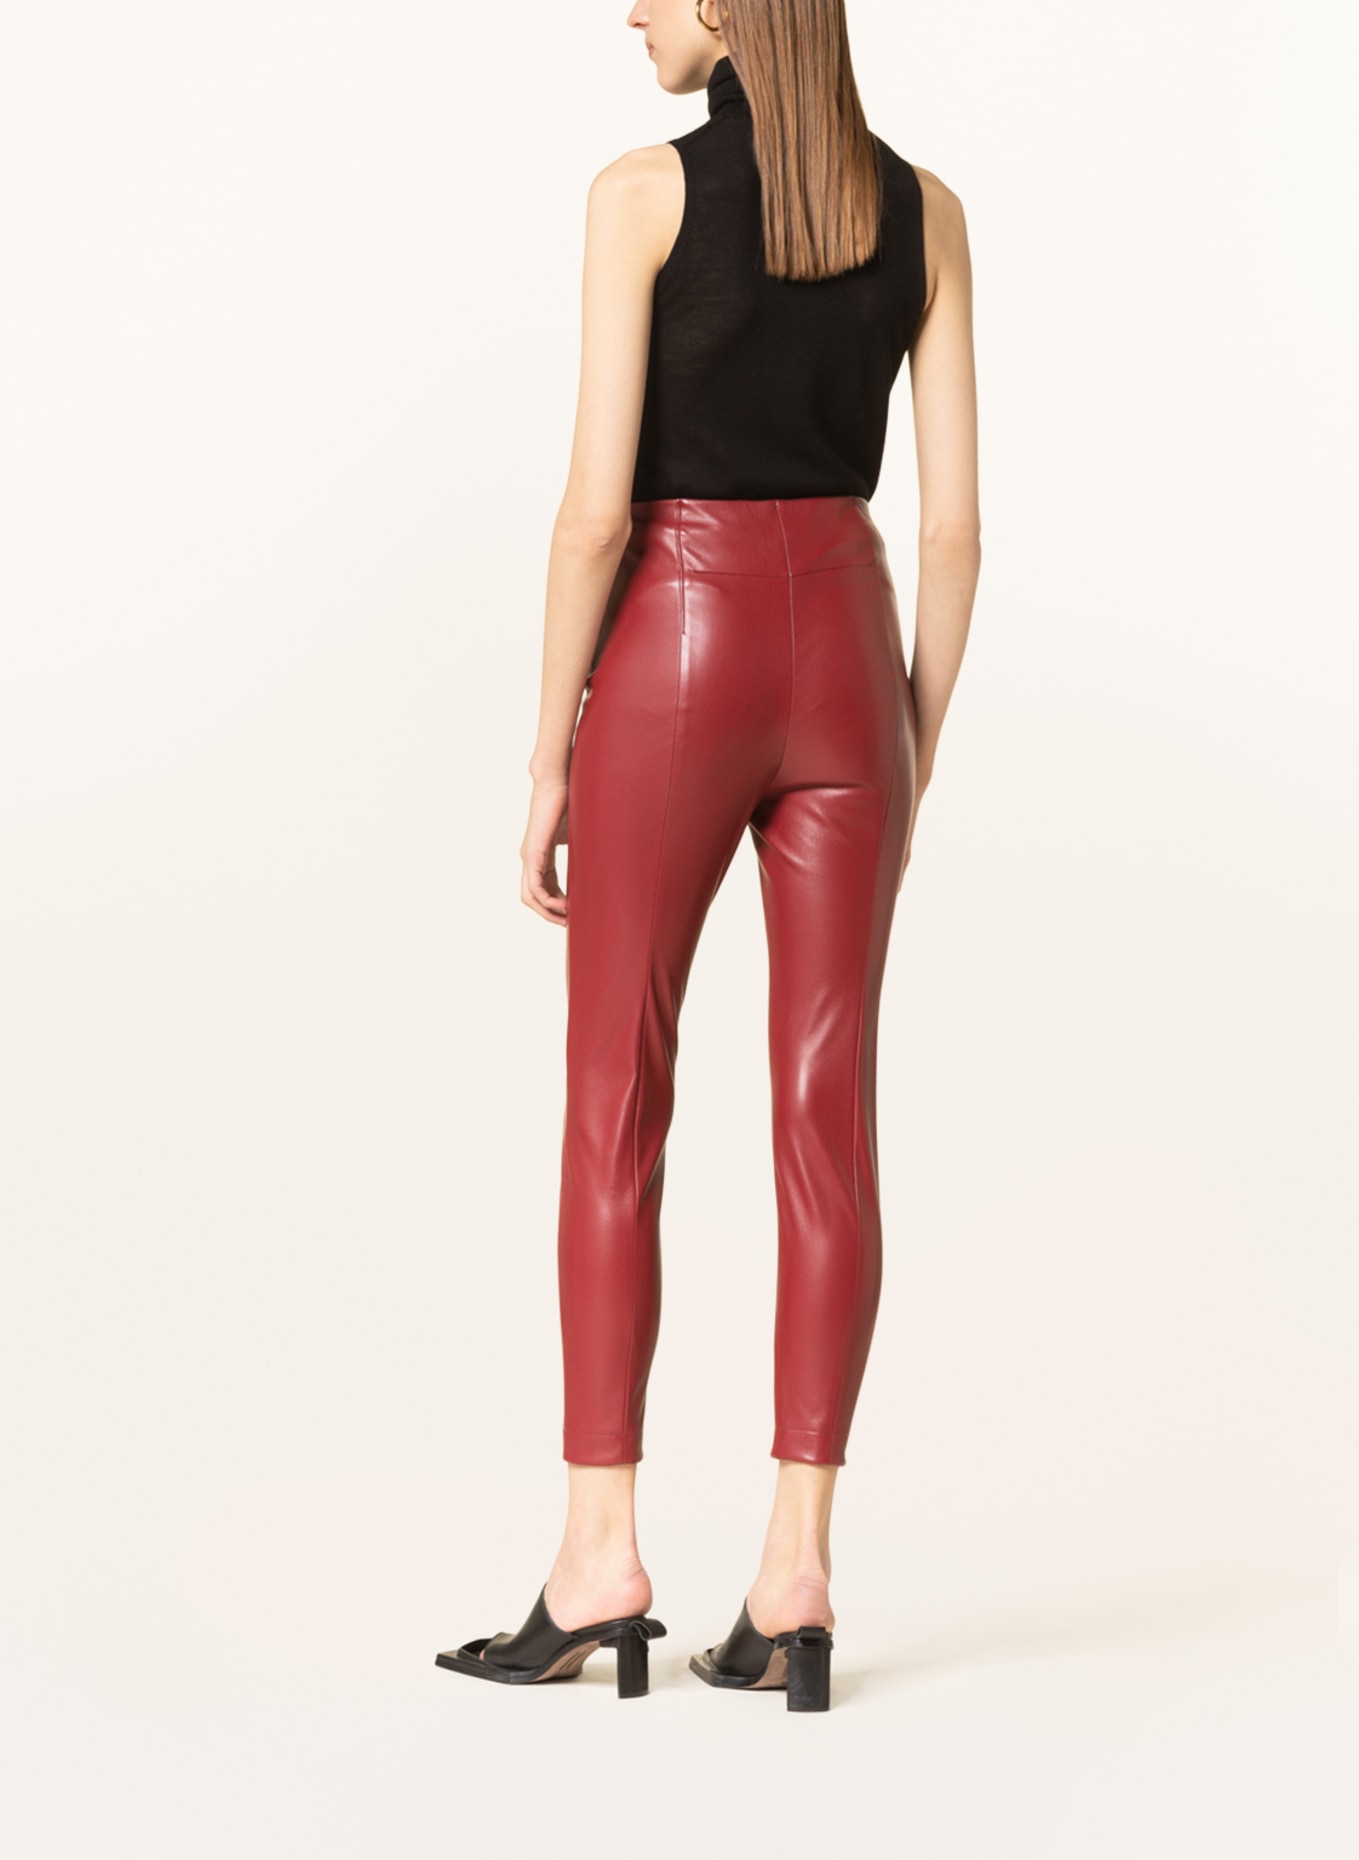 wearing dark red colour leather leggings pant